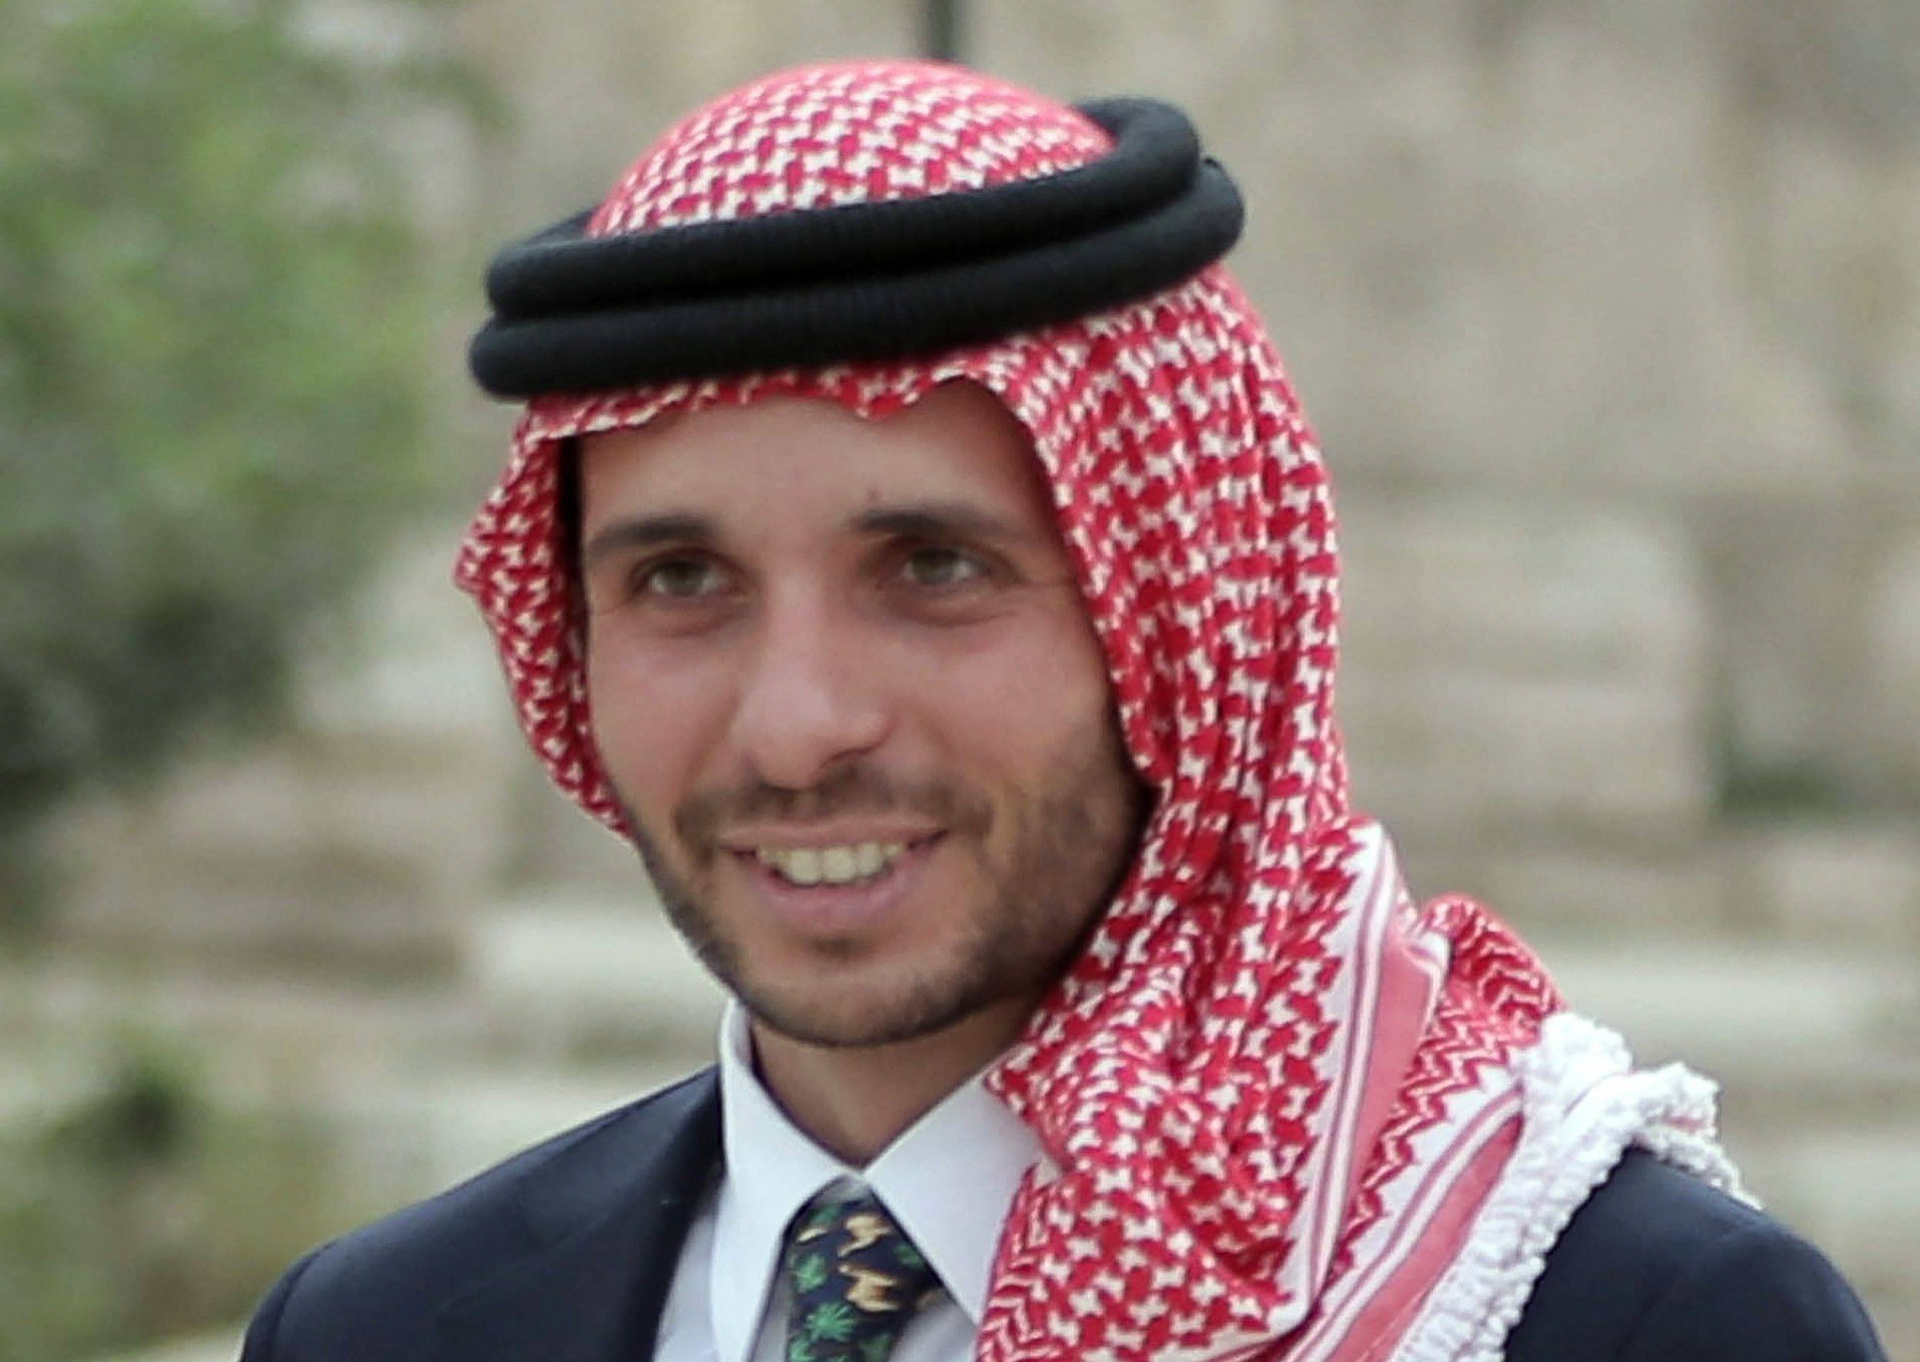 Facts about Jordan’s former crown prince in isolation